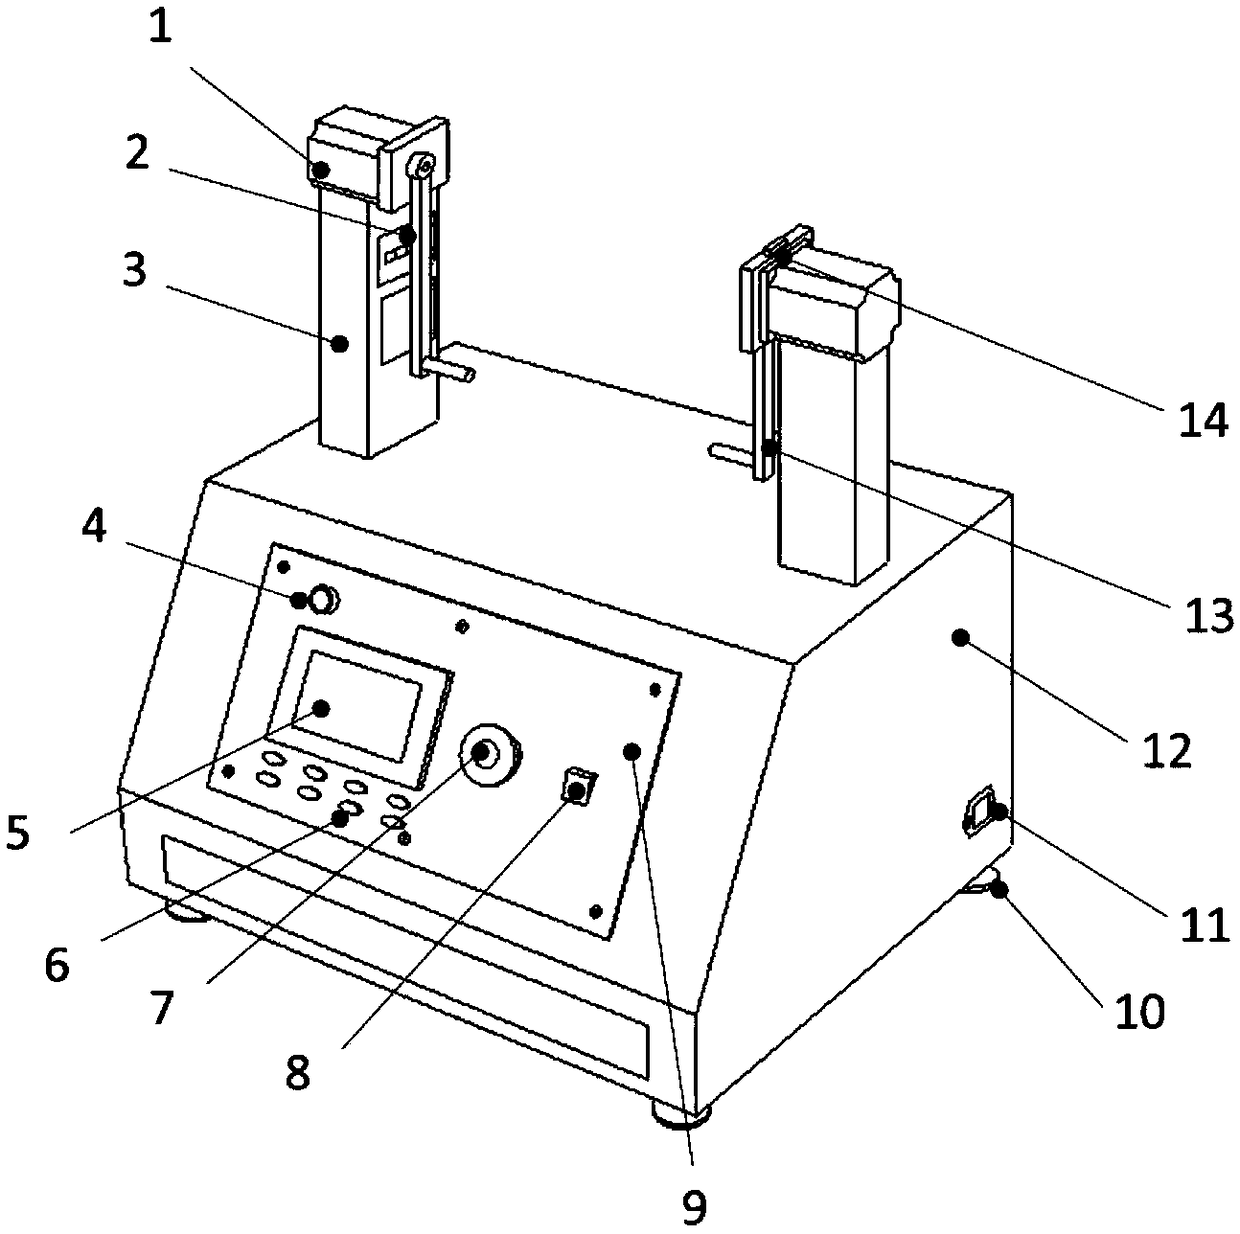 Watch step-counting accuracy detection device capable of automatically leveling